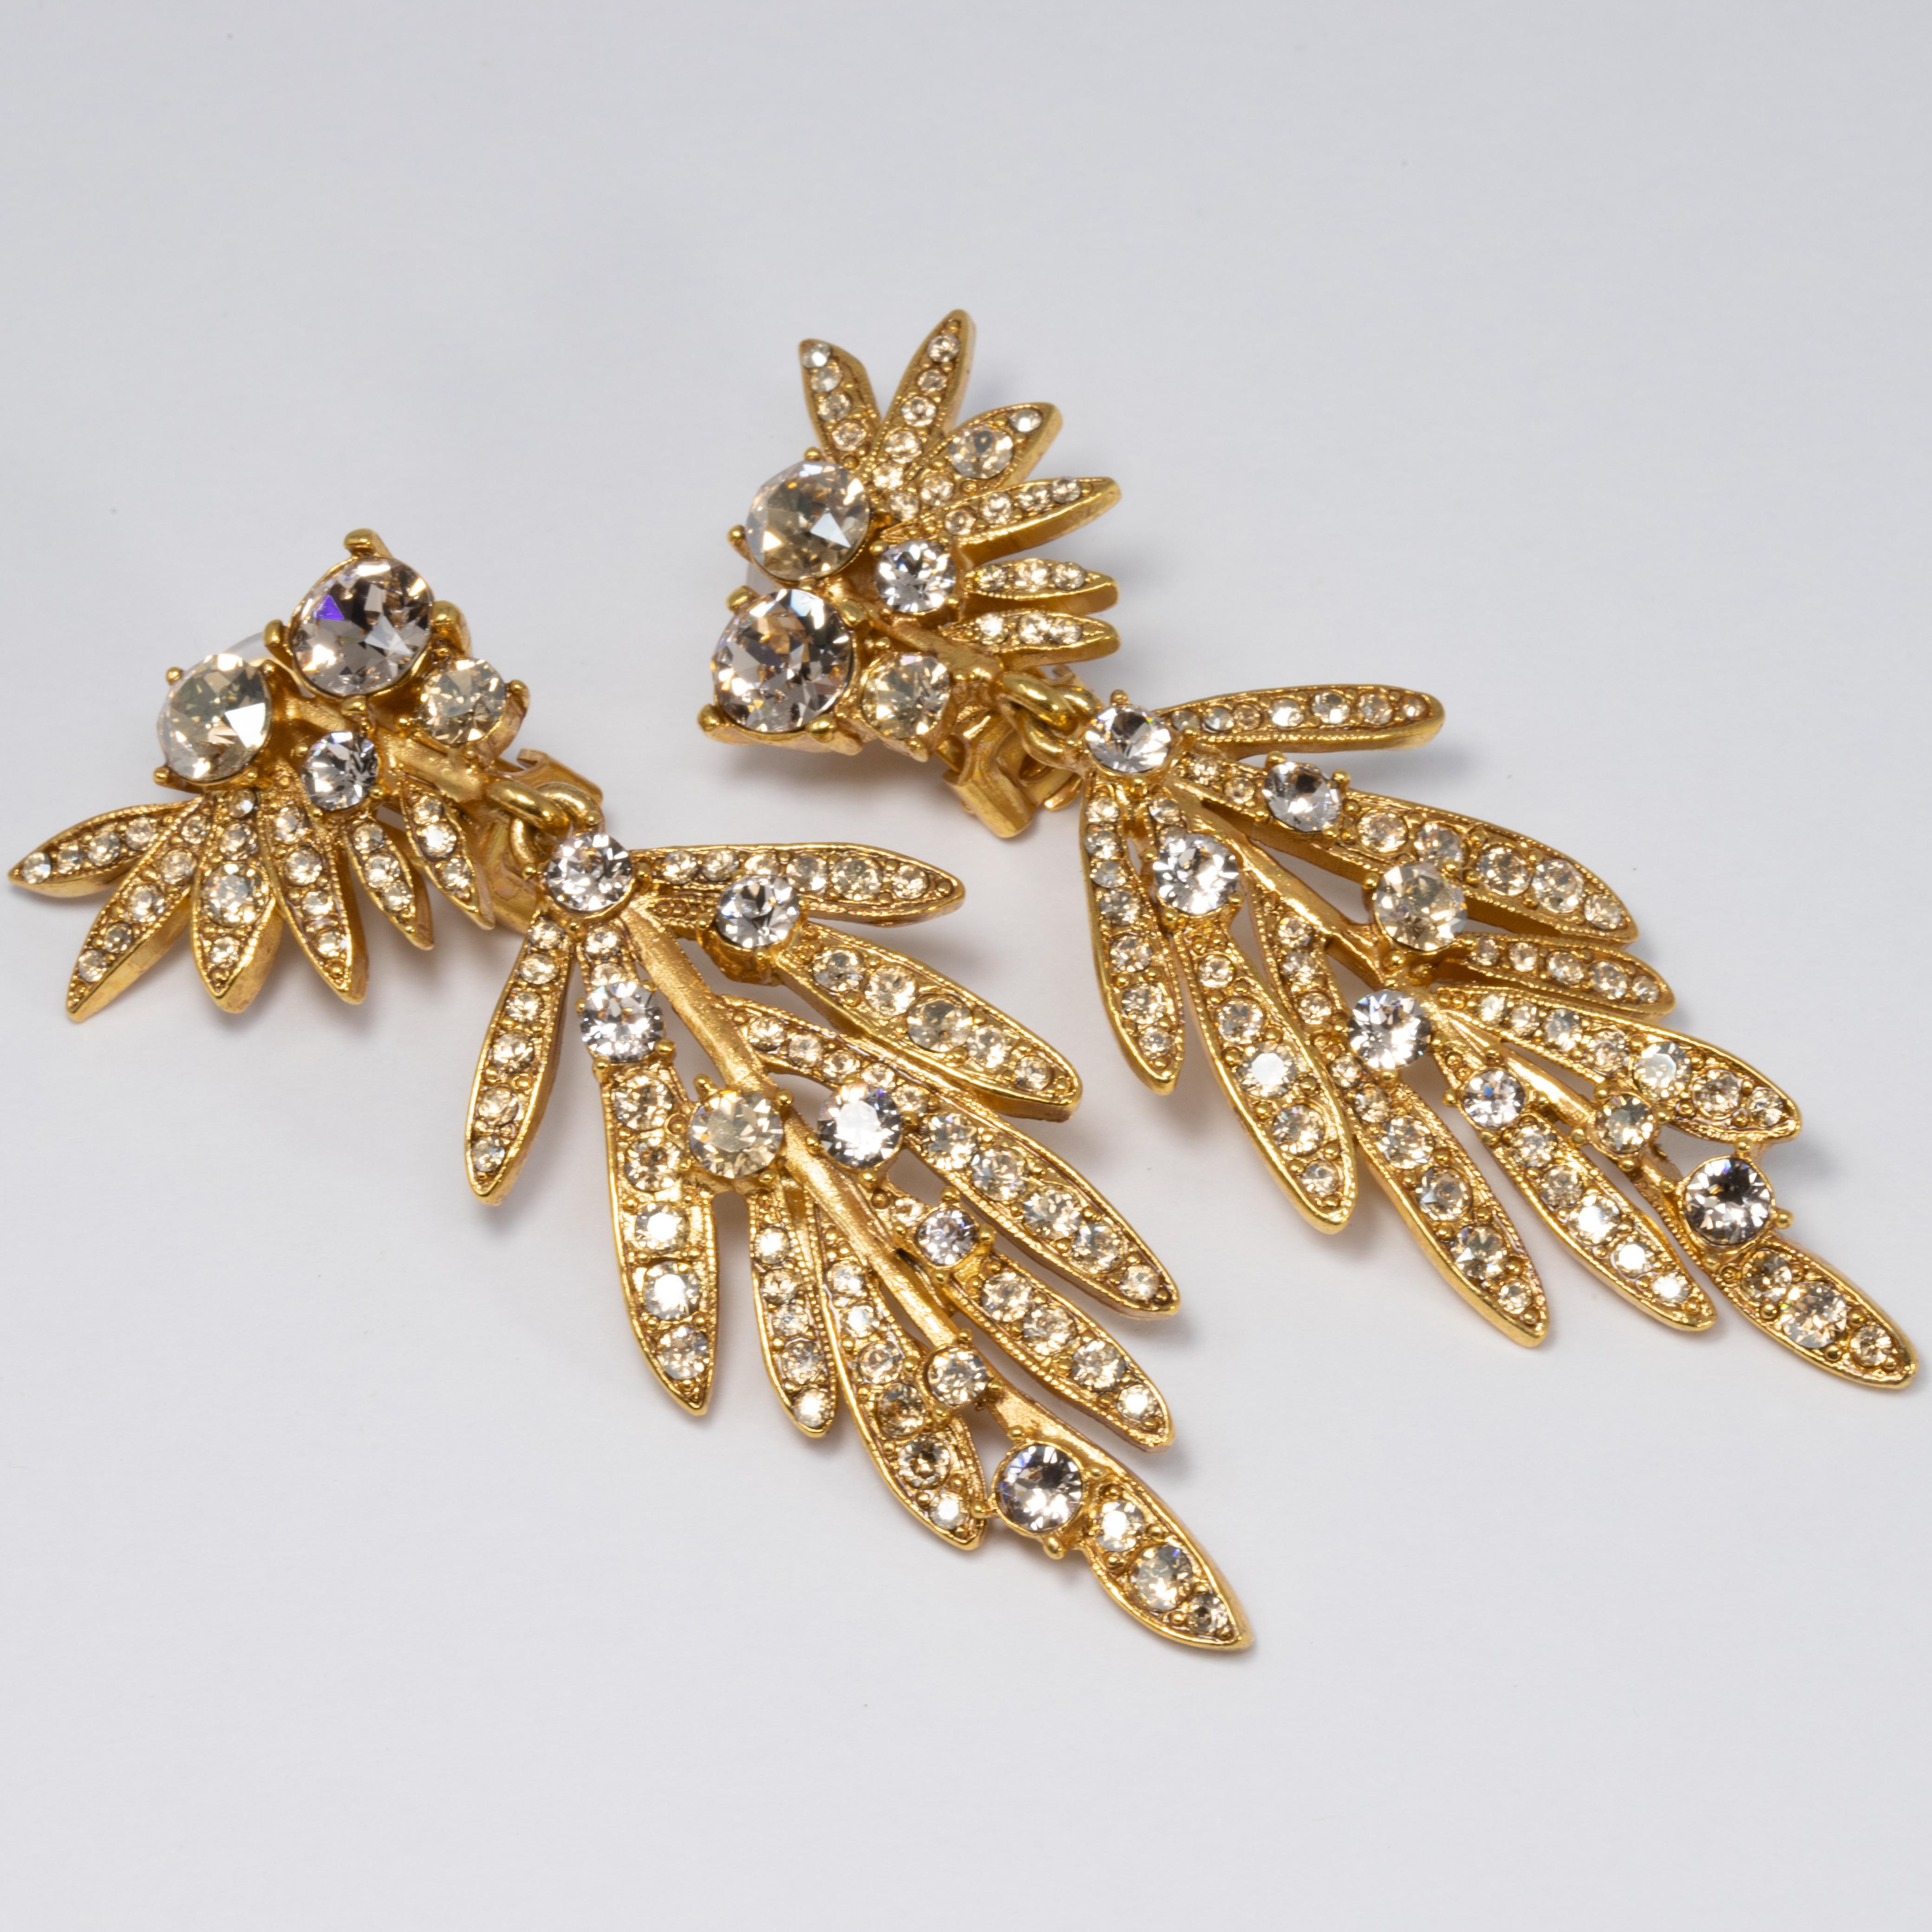 An exquisite pair of earrings by Oscar de la Renta! Each earring features dangling gold-plated tropical leaves accented with clear Swarovski crystals. 

Hallmarks: Oscar de la Renta, Made in USA